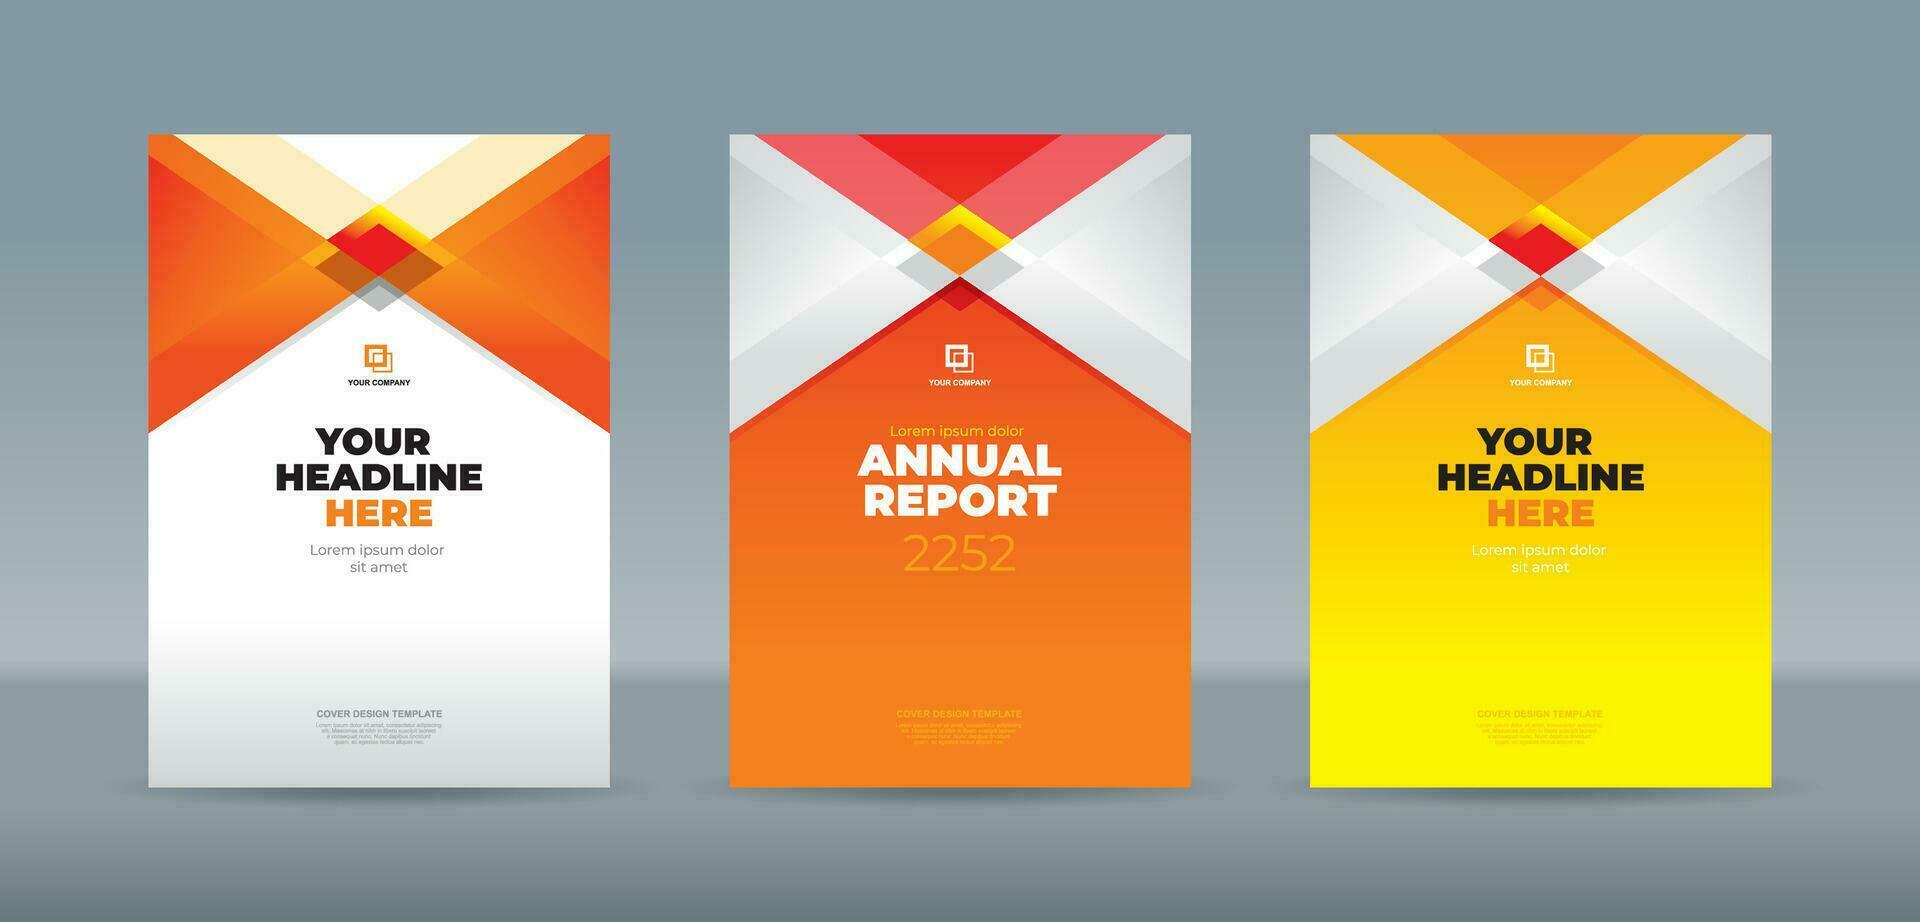 Modern square and triangle shape red, orange and white color theme, A4 sized book cover template for annual report, magazine, booklet, proposal, portfolio, brochure, poster, company profile vector